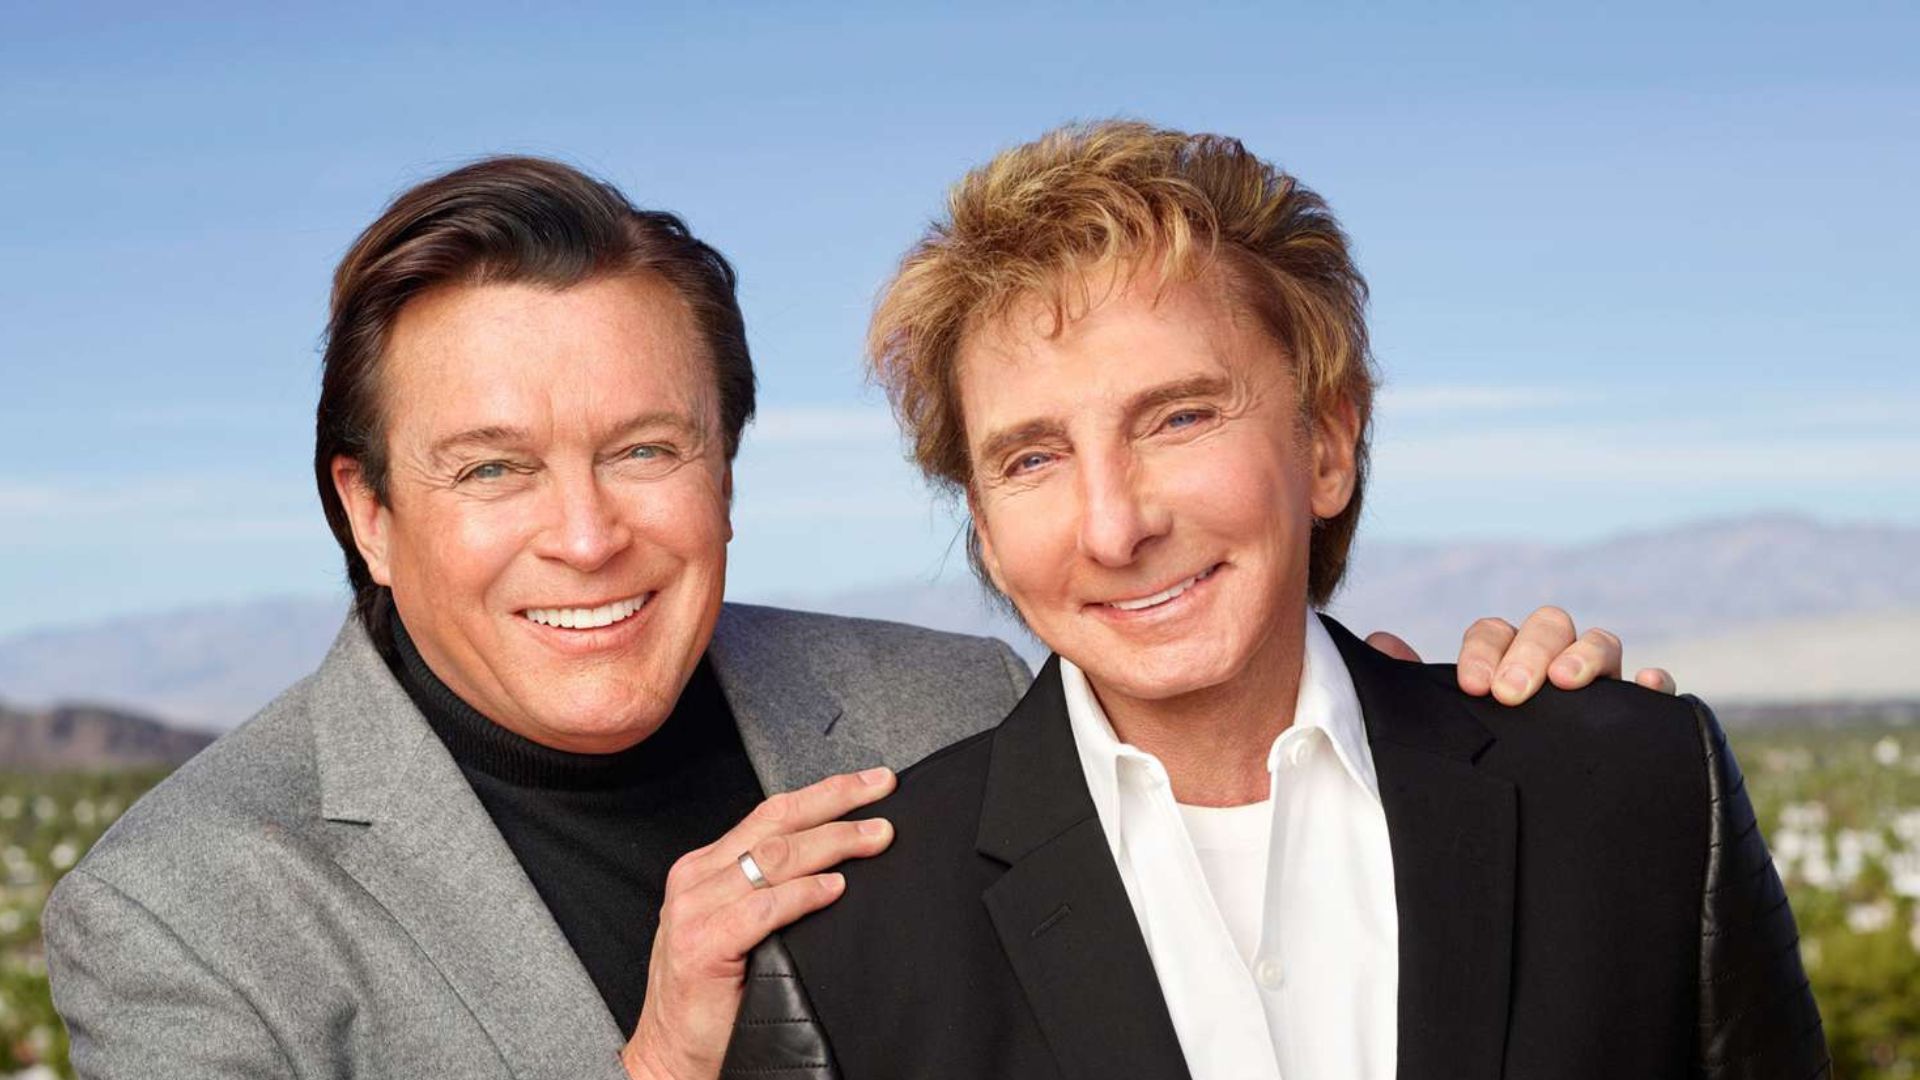 Exploring Barry Manilow's Husband And NBC's Christmas Special